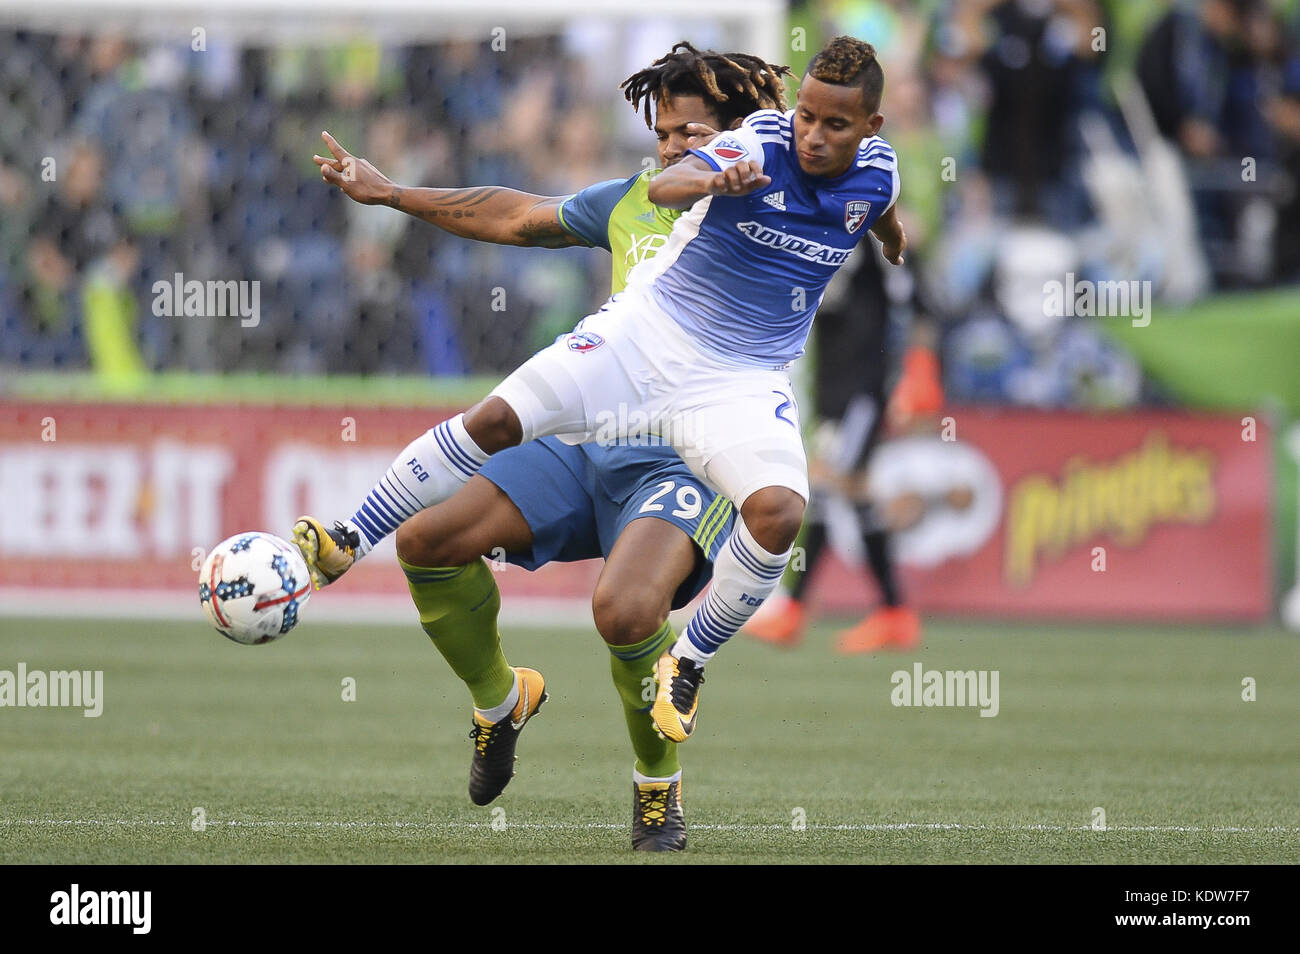 Seattle, Washington, USA. 15th Oct, 2017. Sounders defender ROMAN TORRES (29) challenges Dallas midfielder MICHAEL BARRIOS (21) as FC Dallas visits the Seattle Sounders for an MLS match at Century Link Field in Seattle, WA. Credit: Jeff Halstead/ZUMA Wire/Alamy Live News Stock Photo